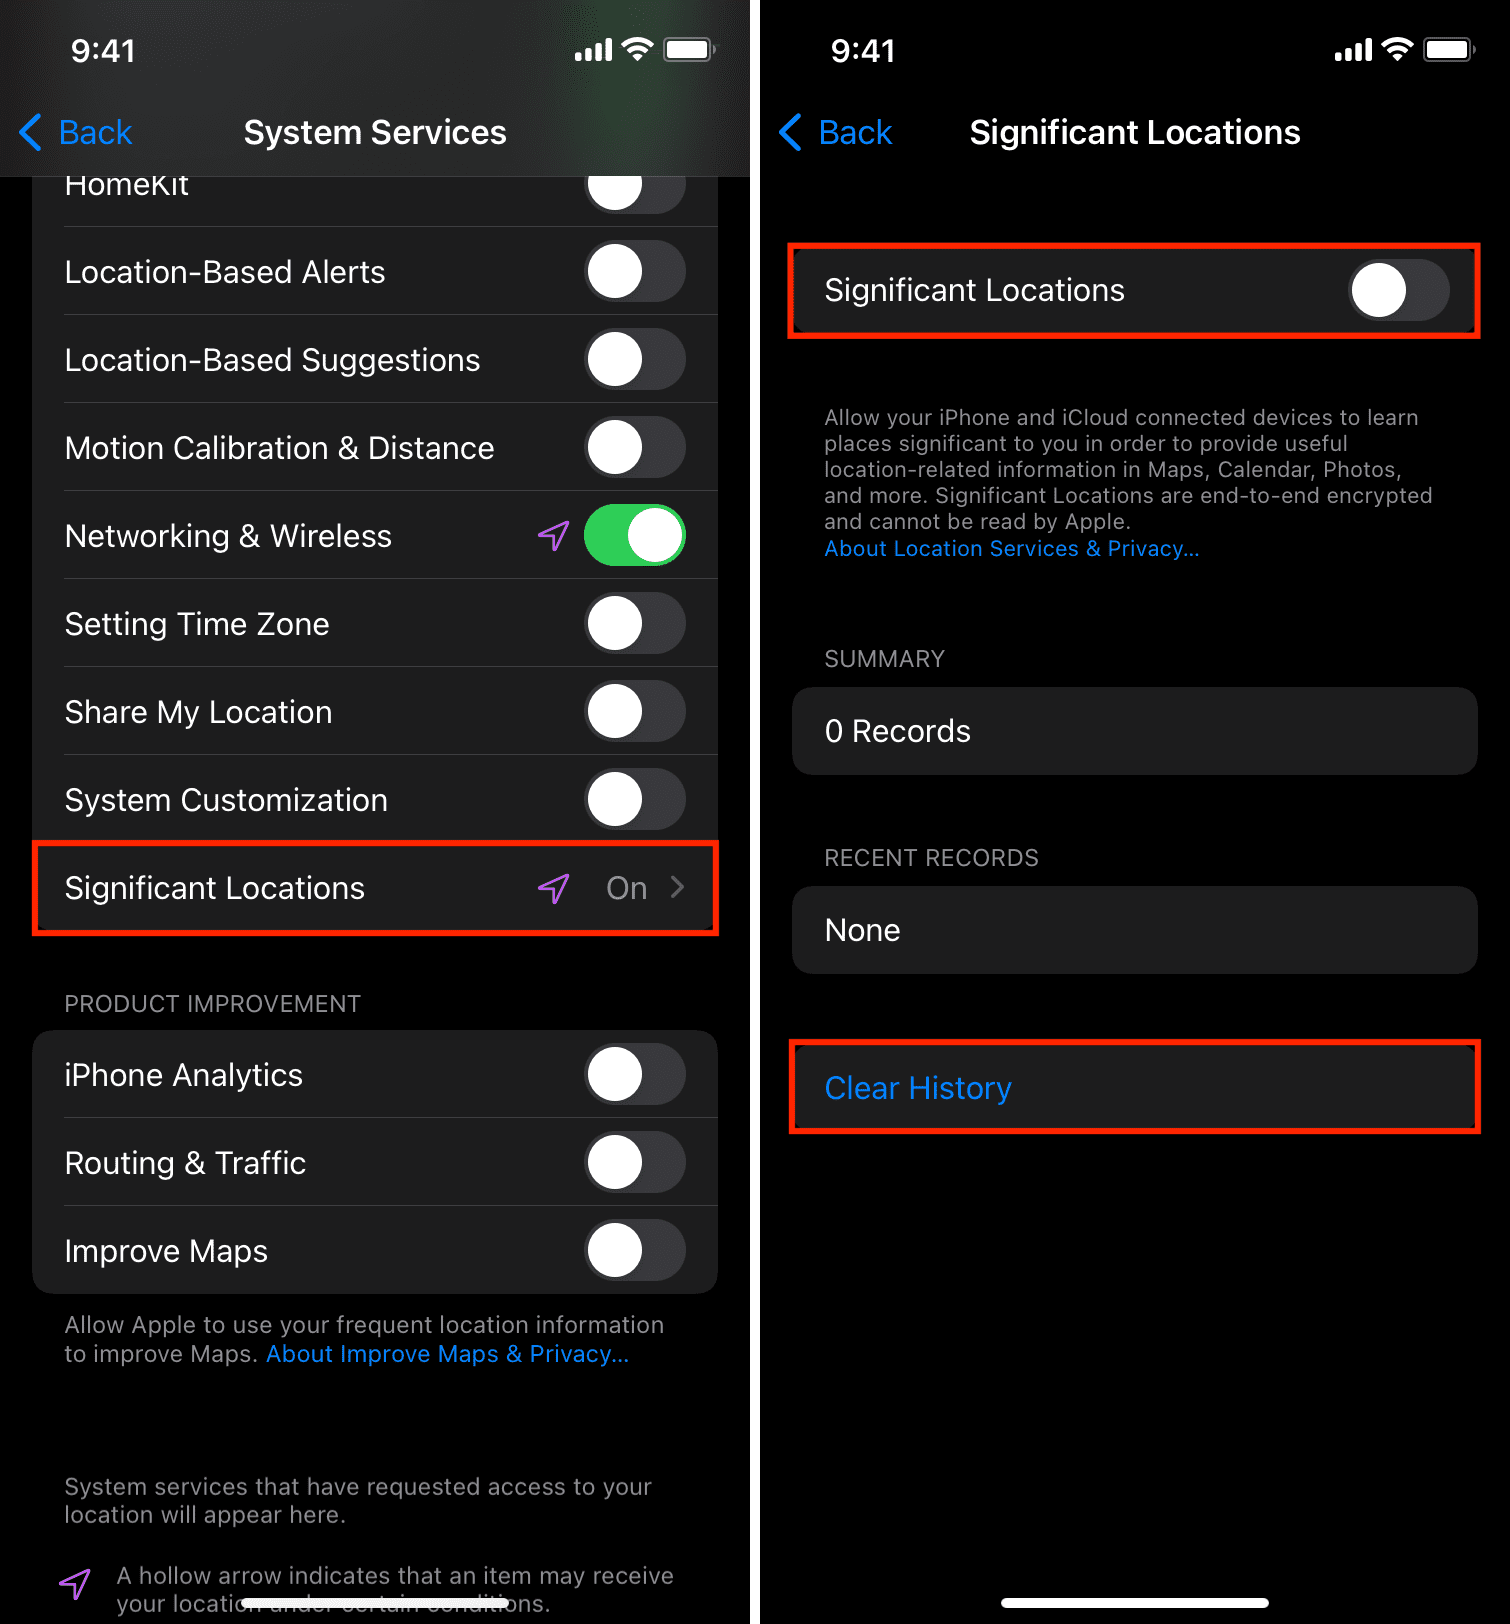 Clear History and Turn off Significant Locations on iPhone